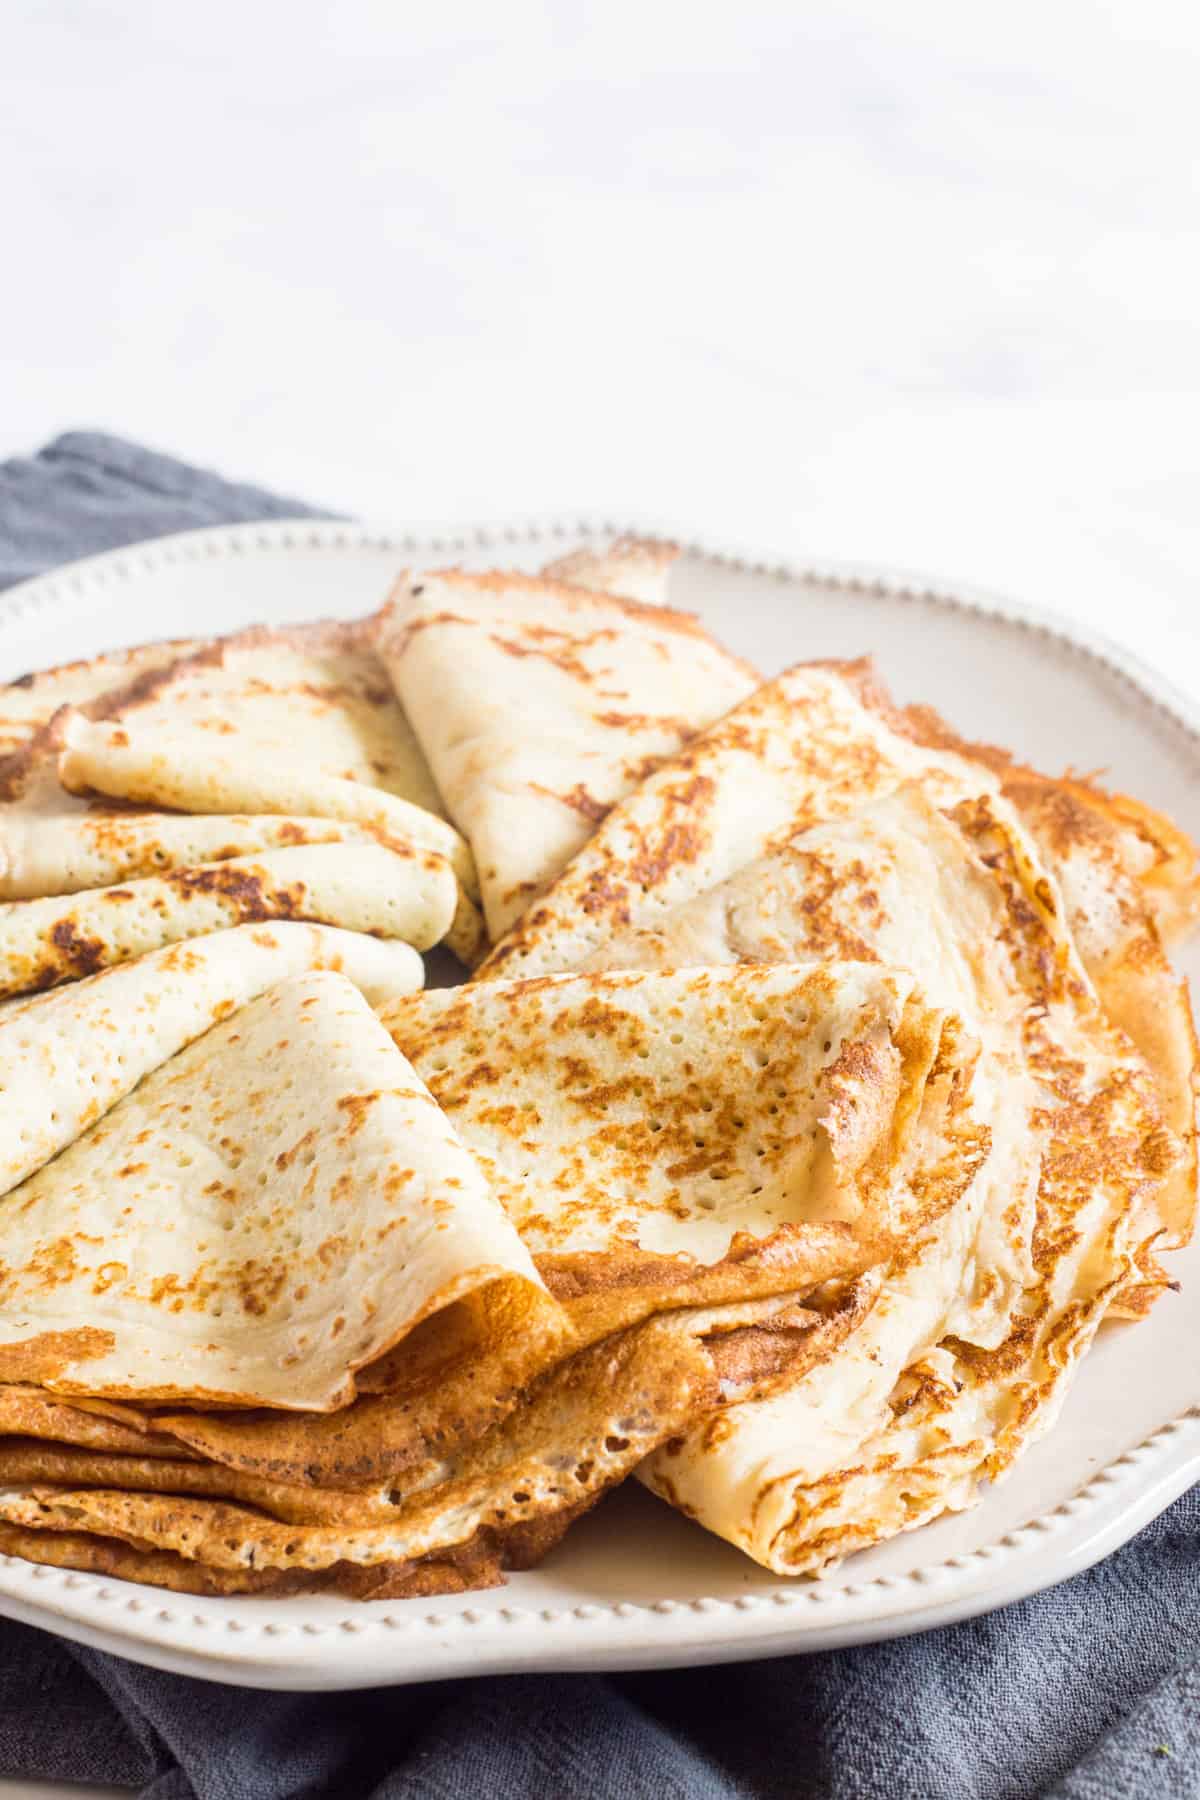 Folded crepes on a plate.